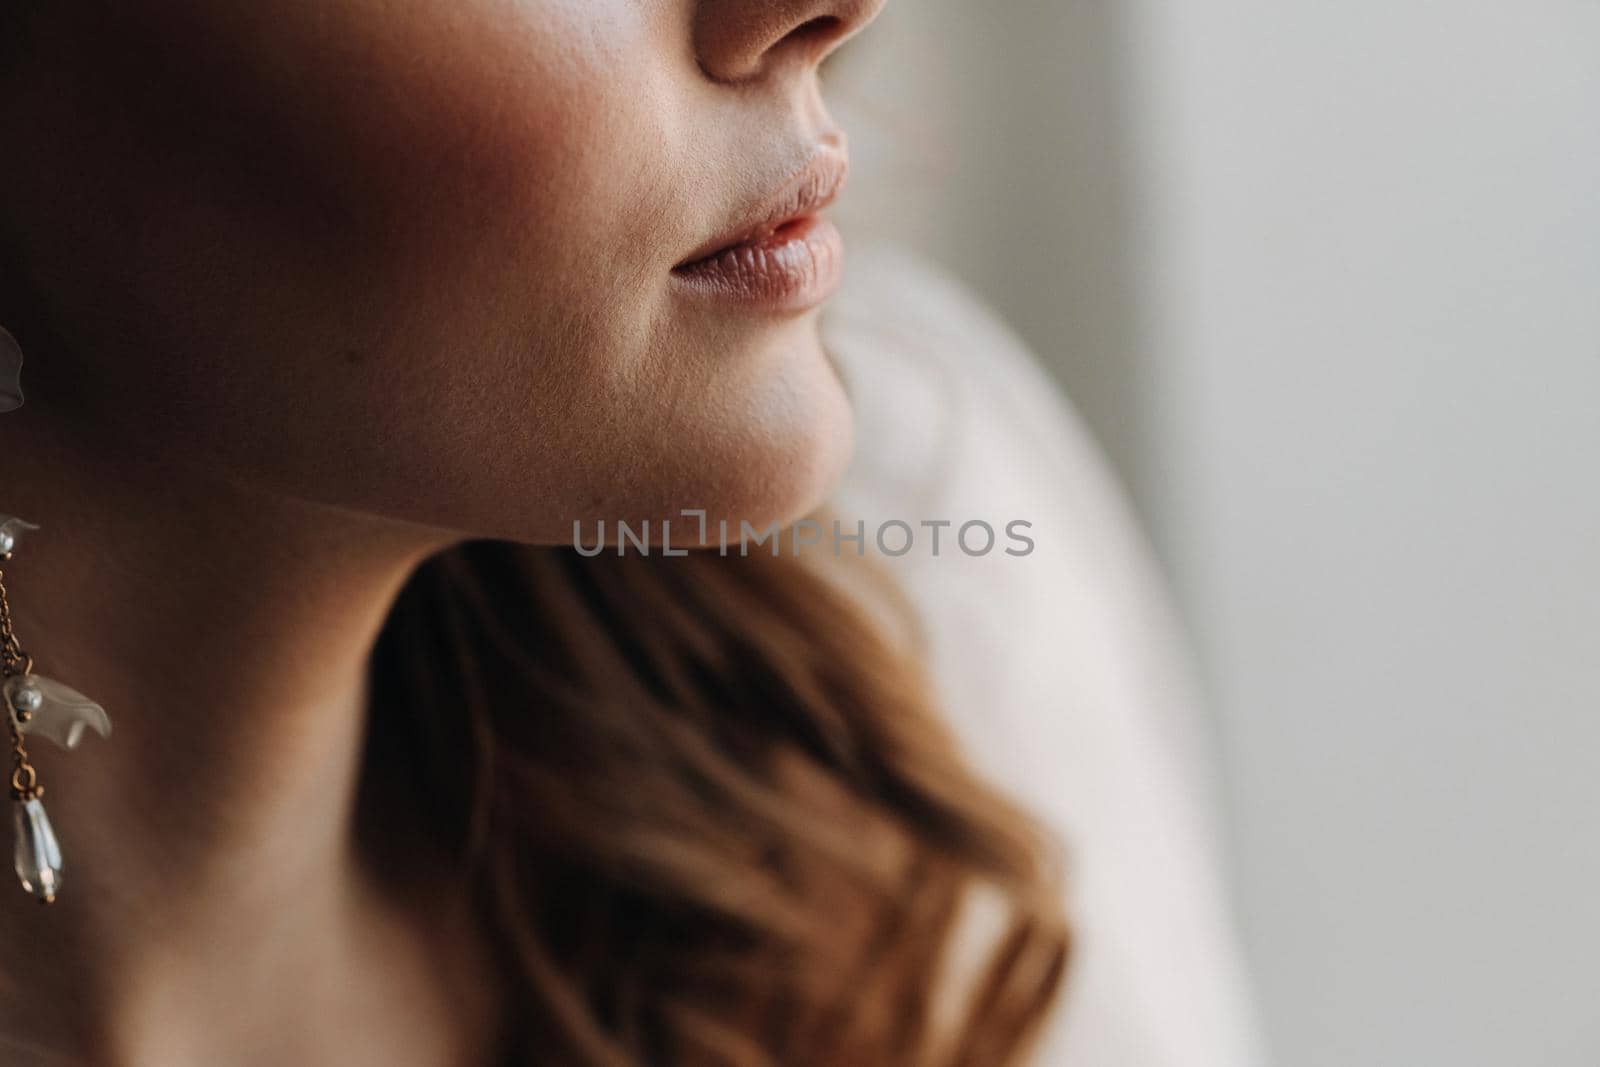 Close-up portrait of a luxurious bride in a wedding dress in the morning in her interior.